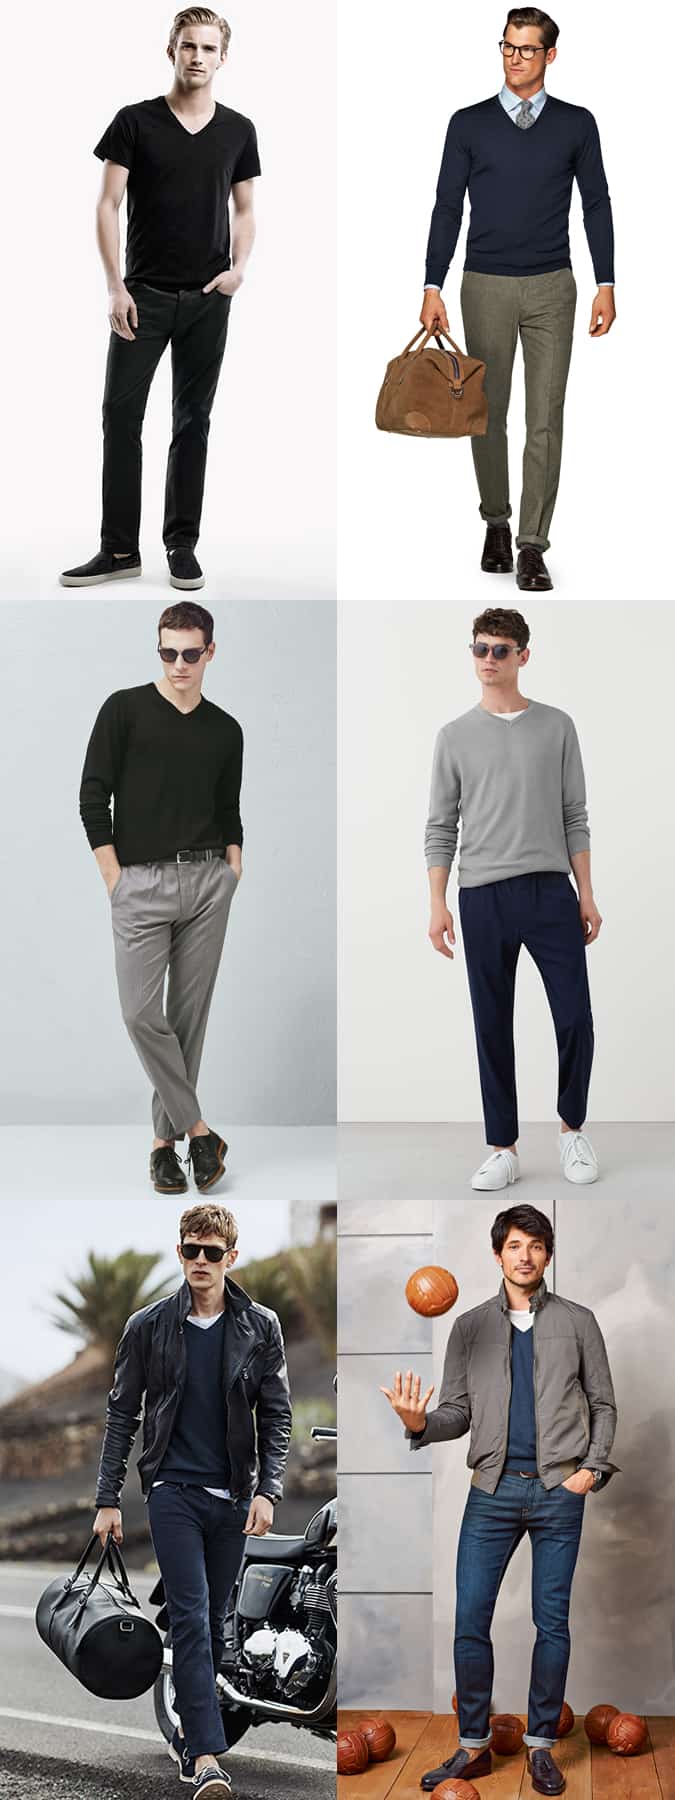 Men's V-Neck Jumpers and T-Shirts Outfit Inspiration Lookbook